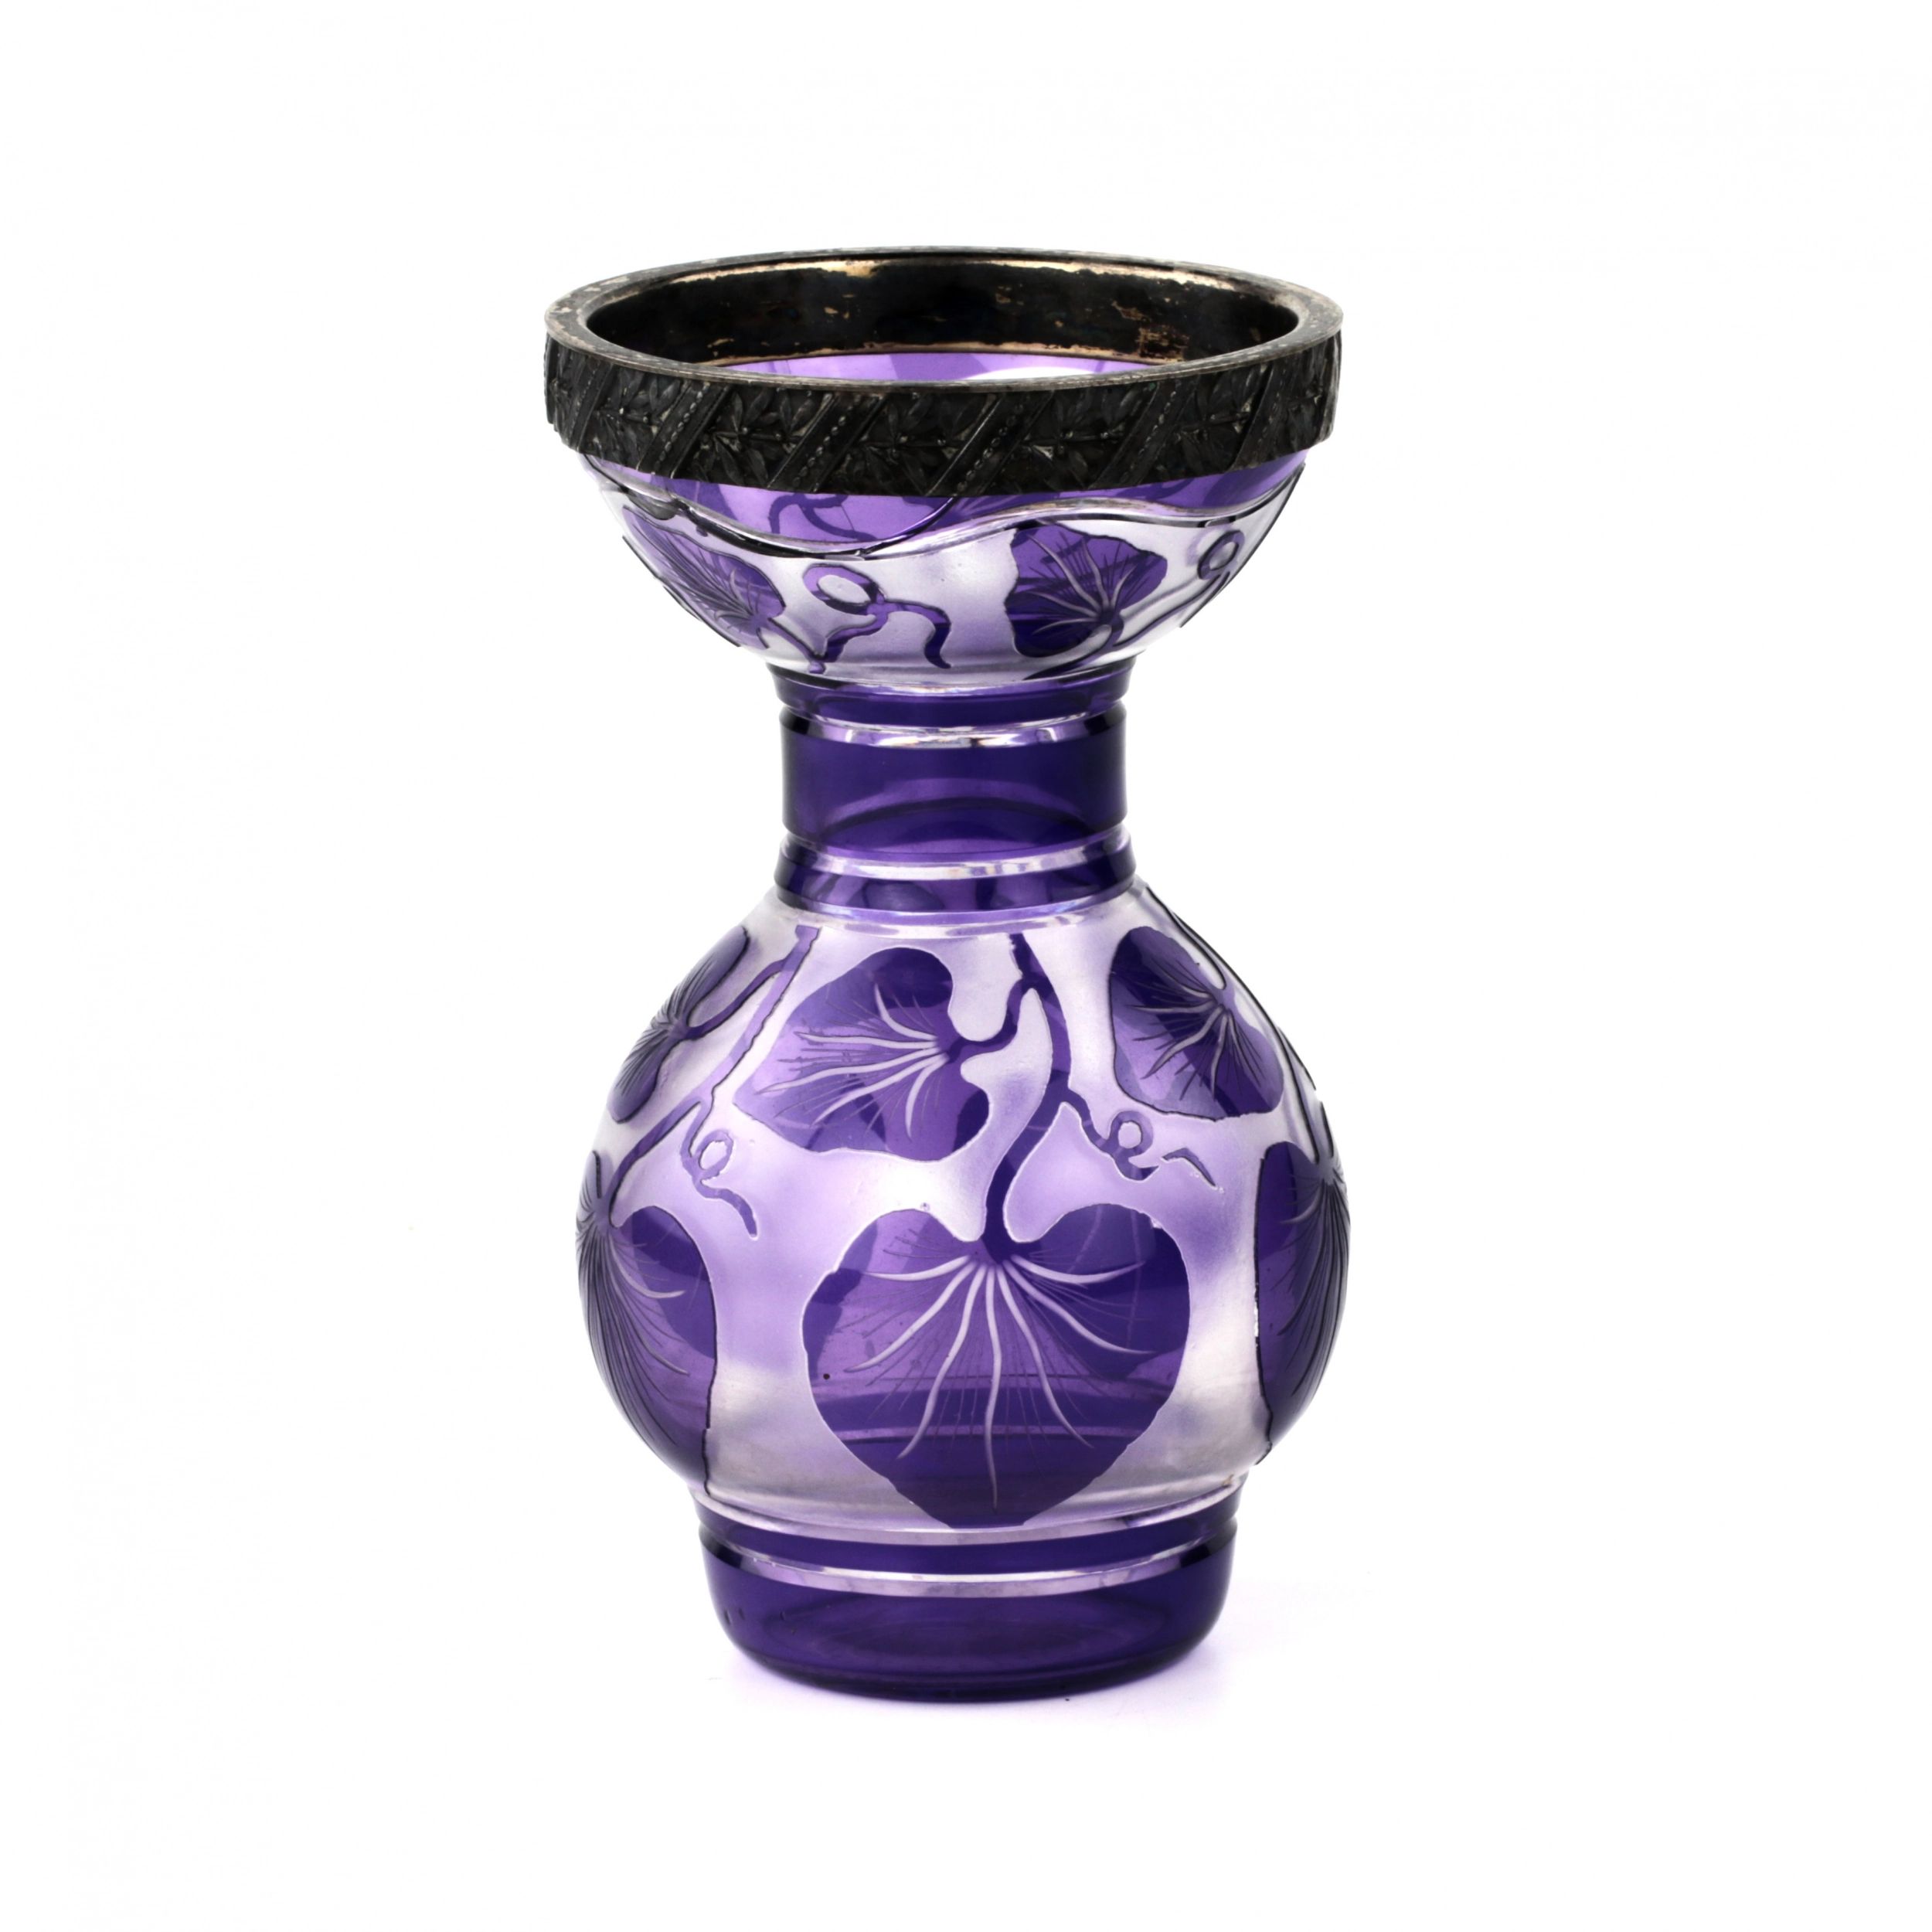 Vase-Bindweed-with-a-silver-rim-84-assay-value-Glass-Russian-empire-The-beginning-of-the-twentieth-century-